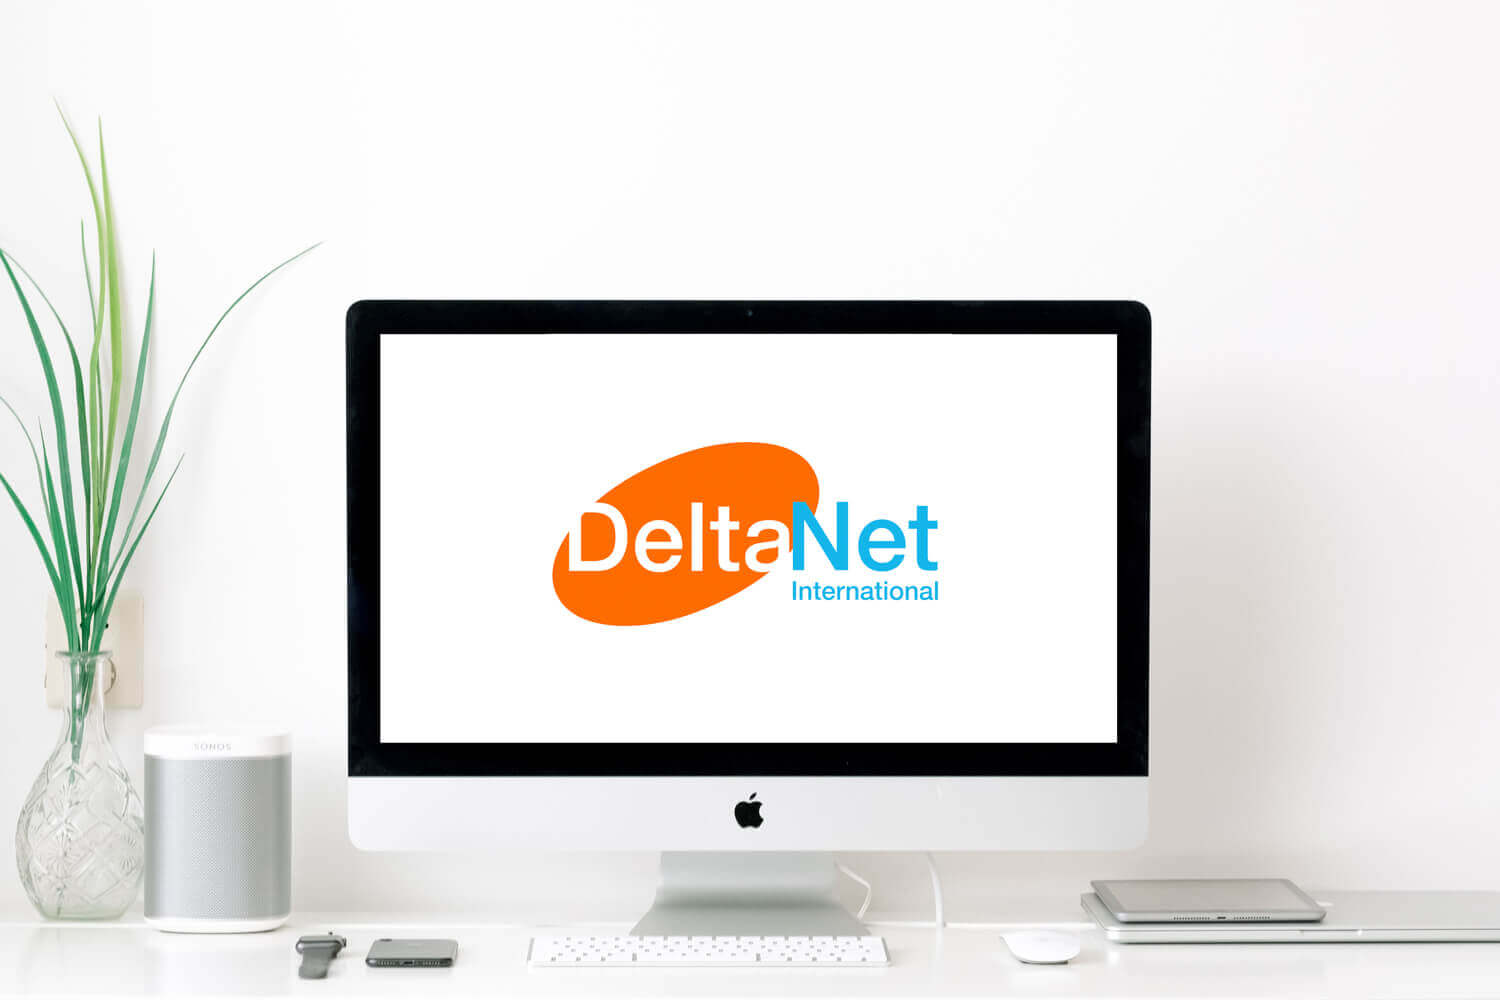 Computer displaying the DeltaNet logo